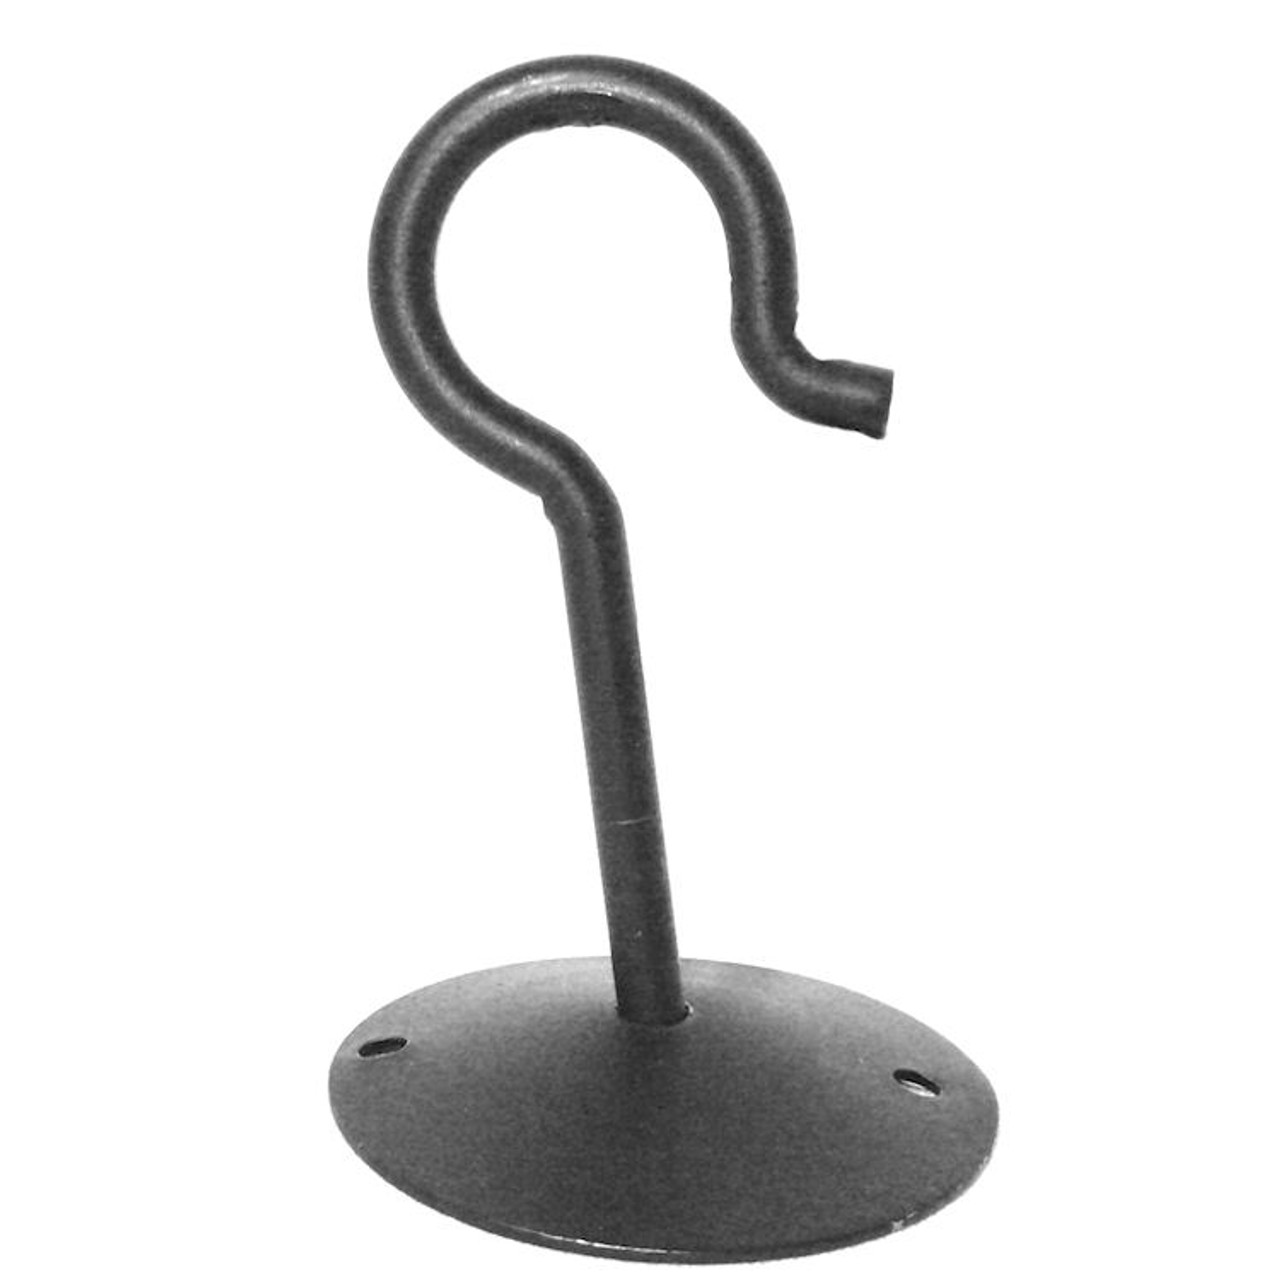 42290 - CEILING HOOK - Jake's Country Trading Post